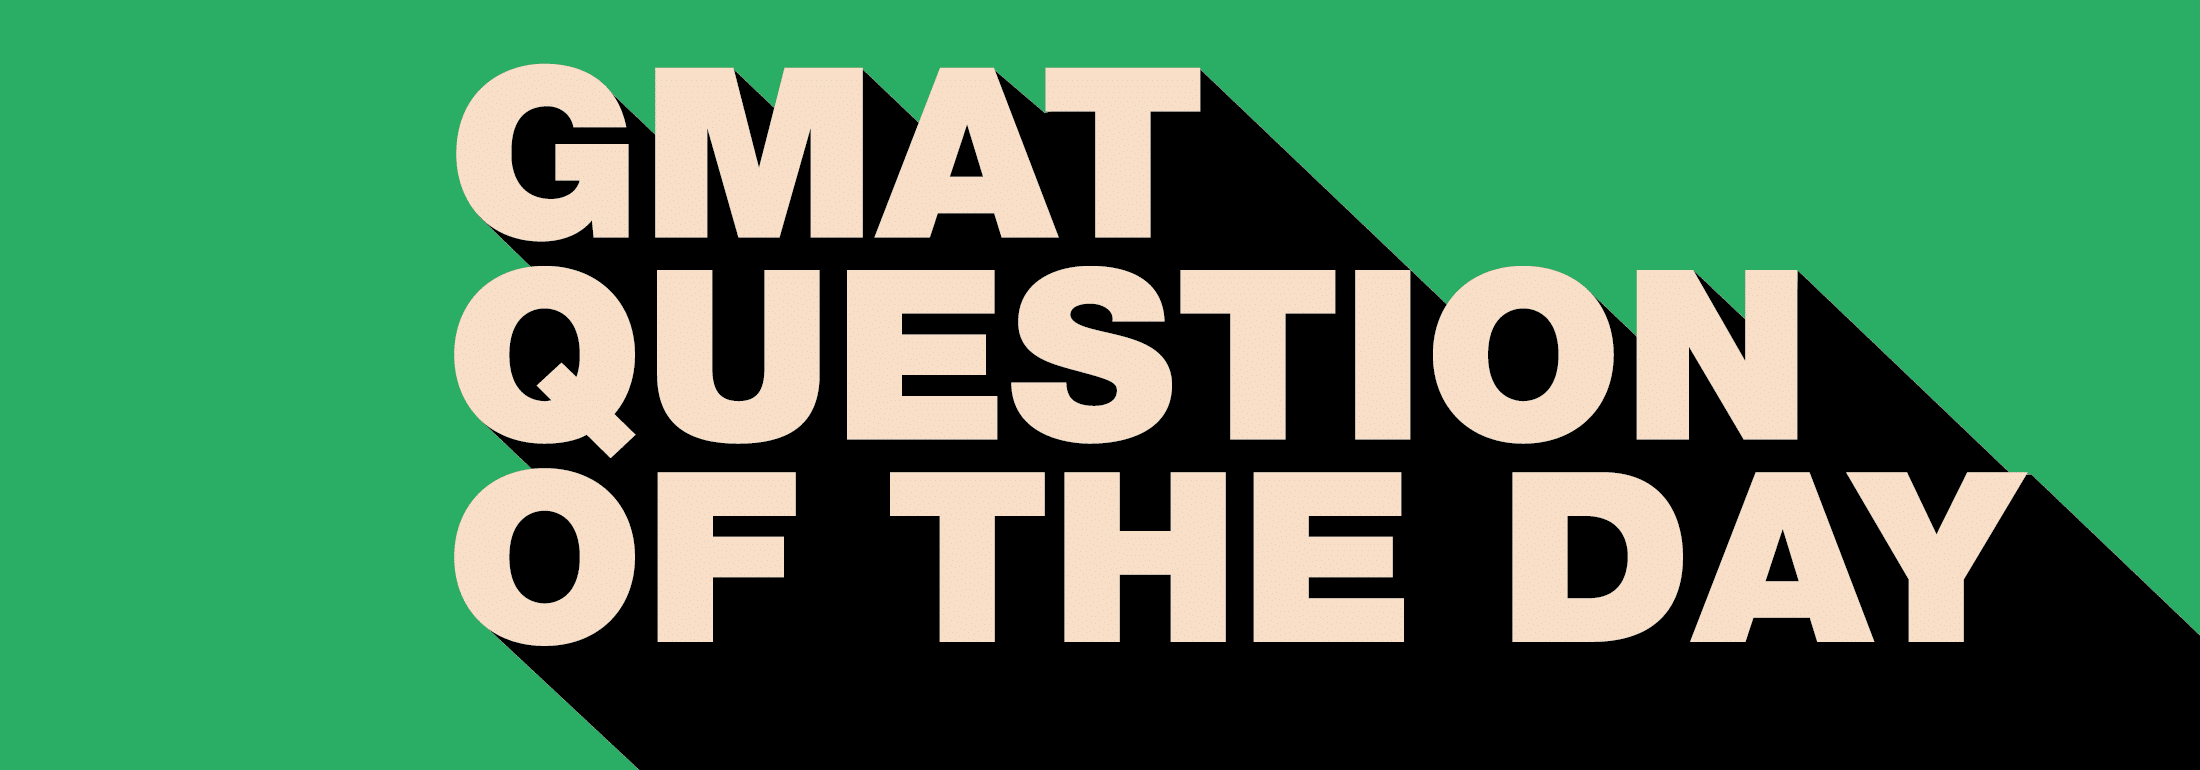 GMAT Question of the Day Work and Rate